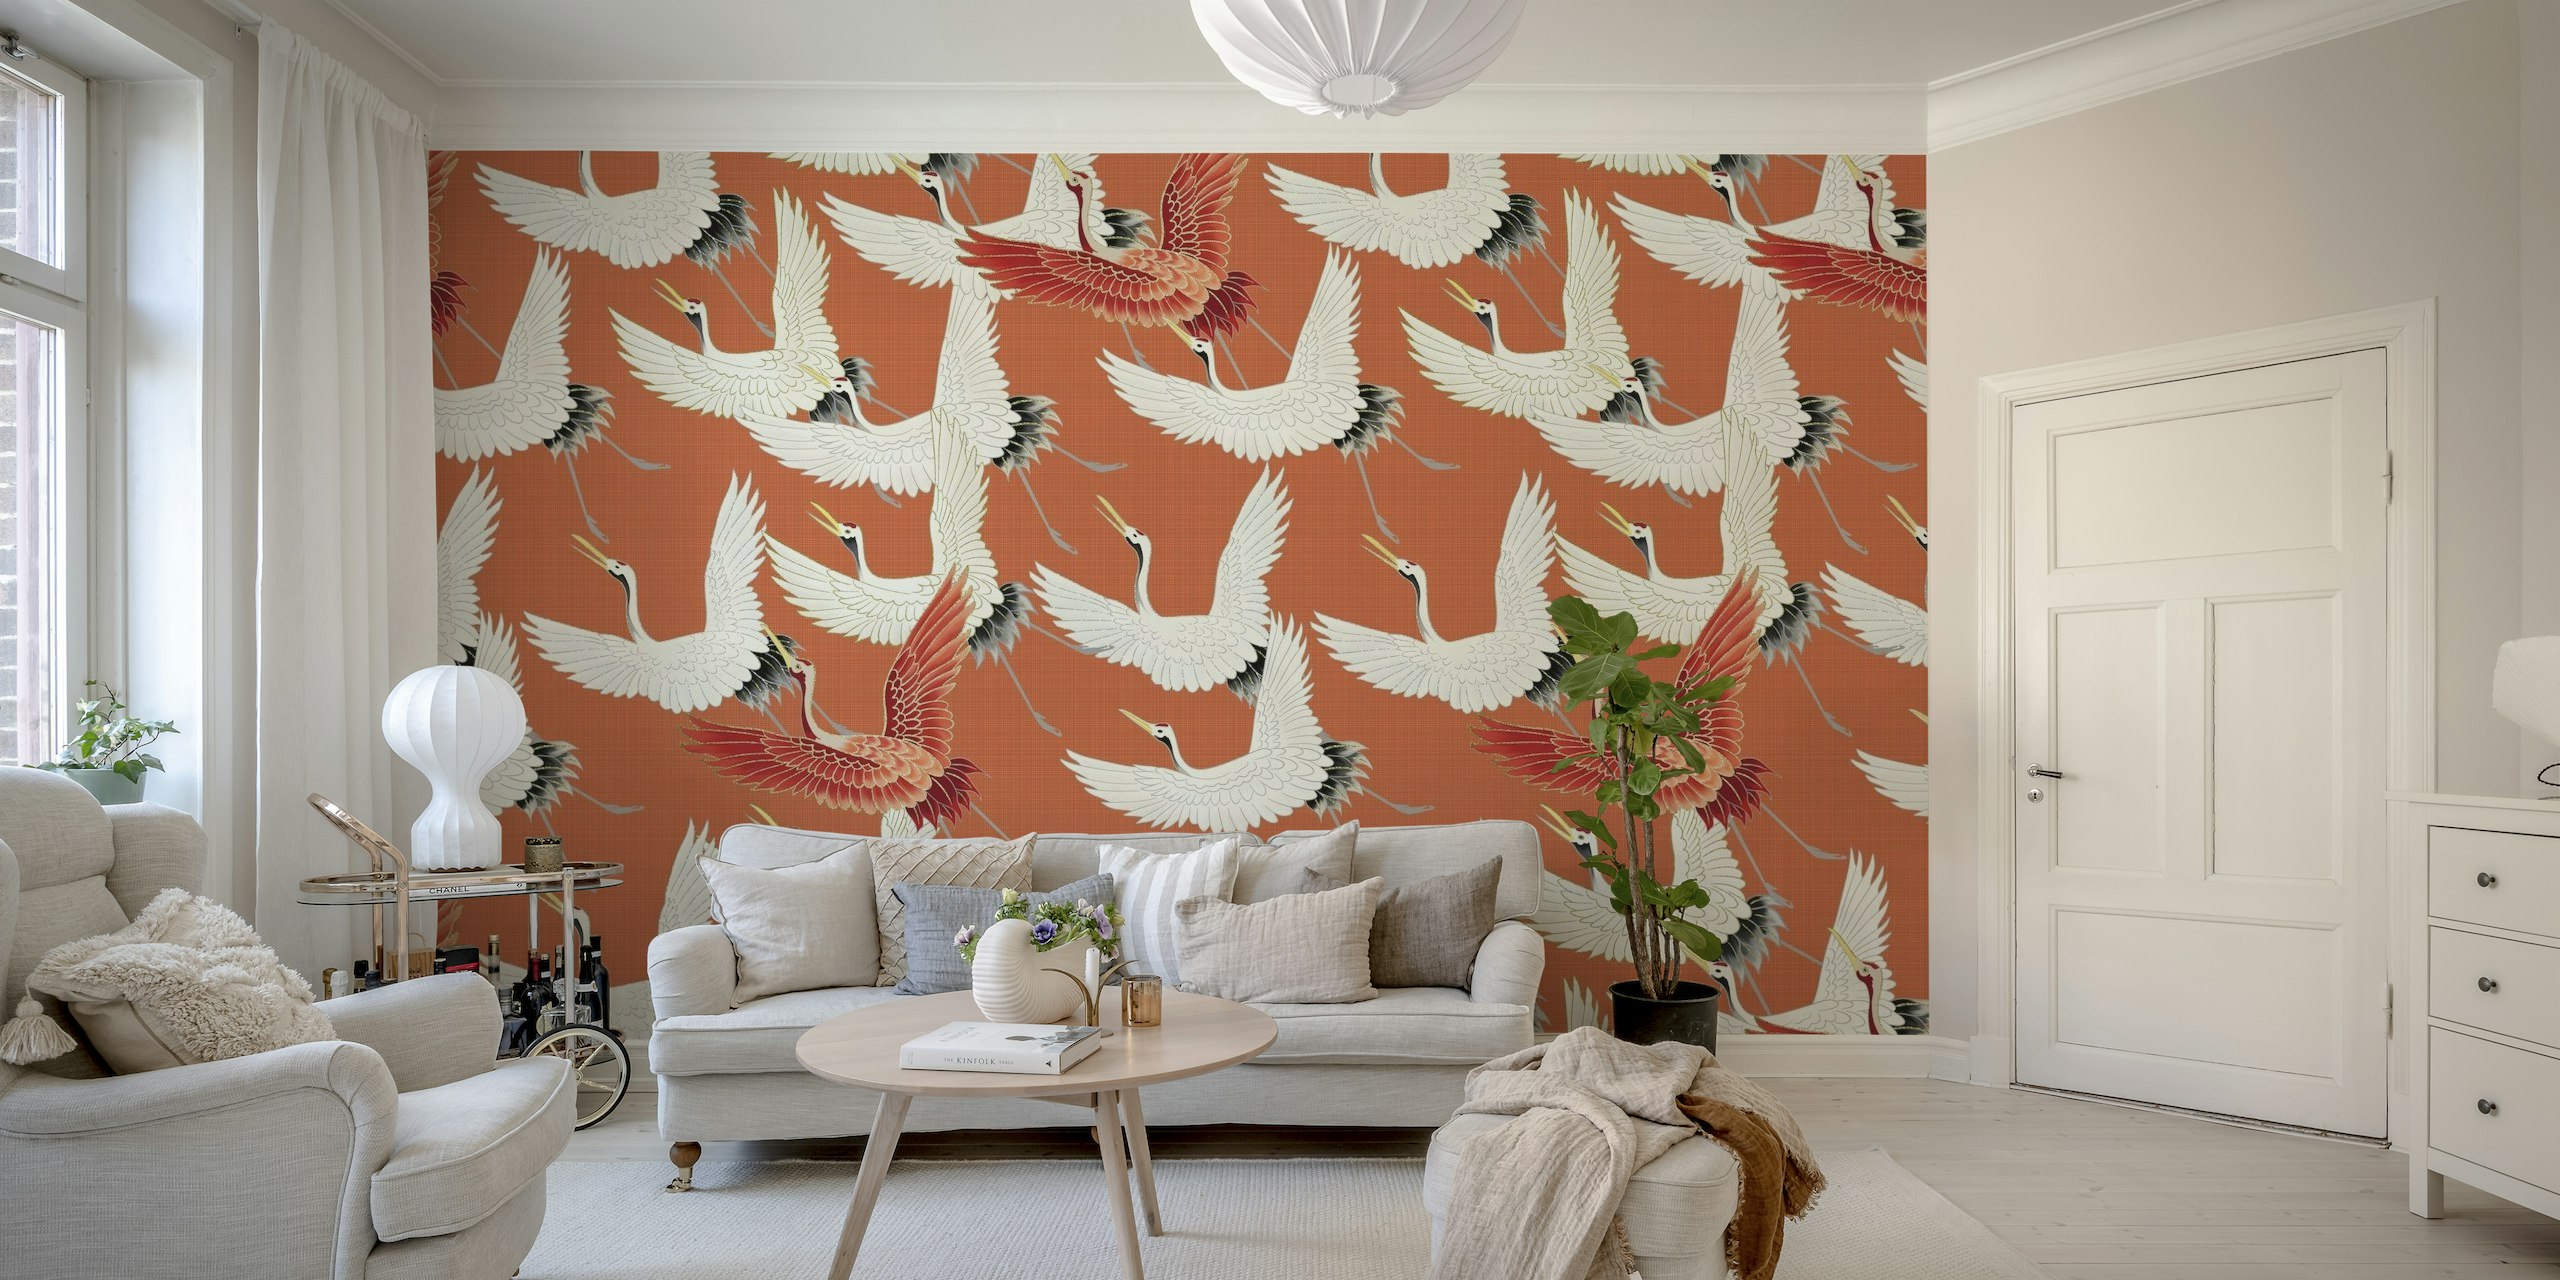 Japanese Cranes wall mural with graceful birds in flight against a rust-colored background